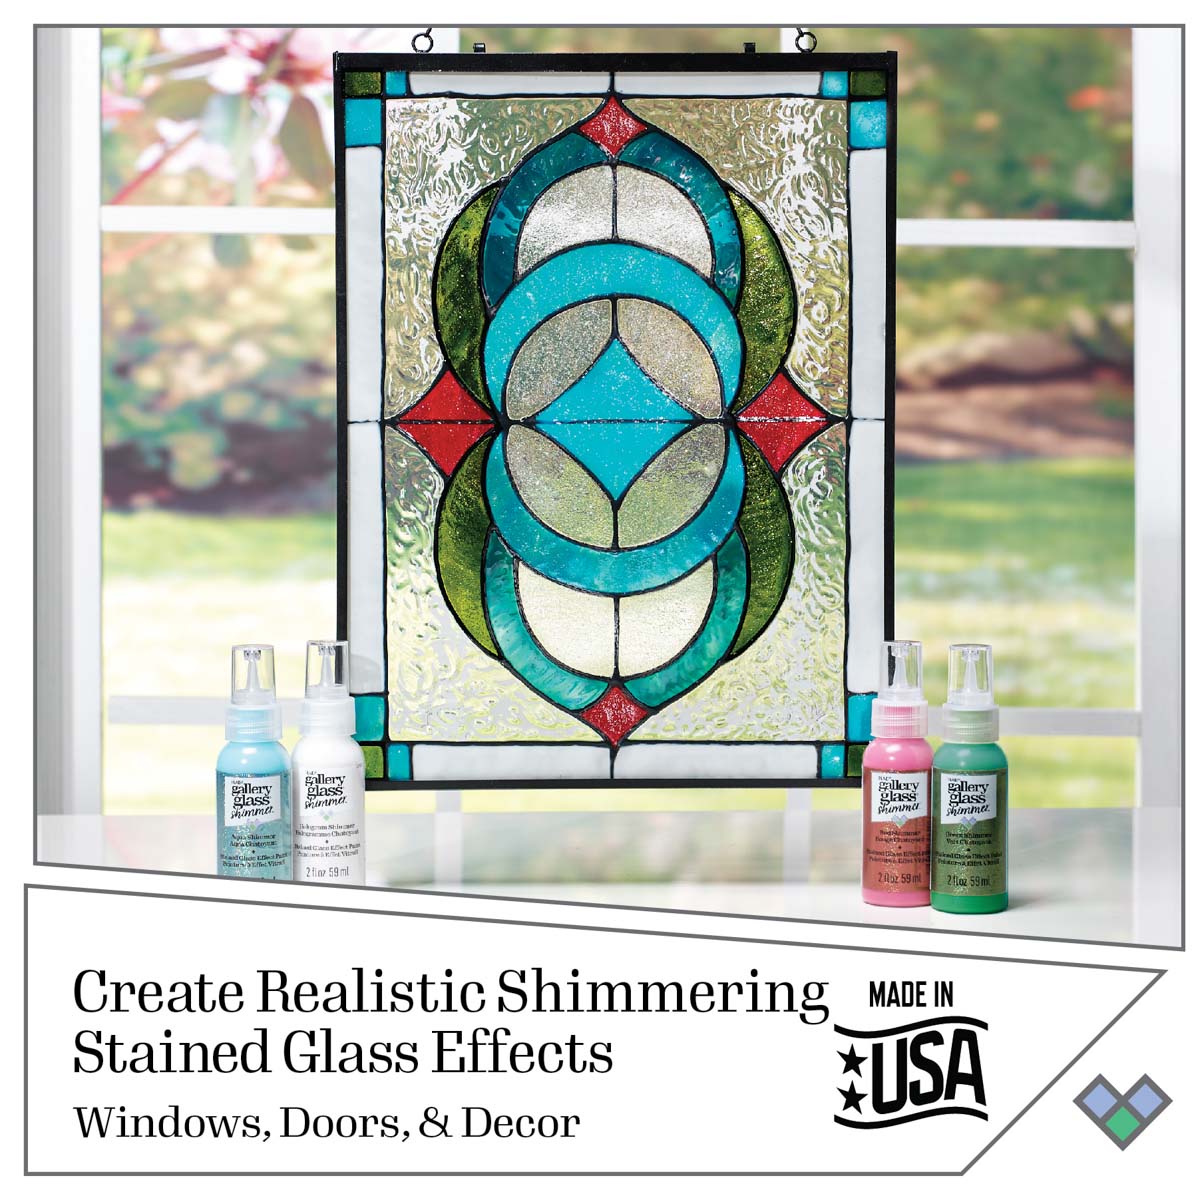 Shop Plaid Gallery Glass ® Stained Glass Effect Paint - Snow White, 2 oz. -  19729 - 19729